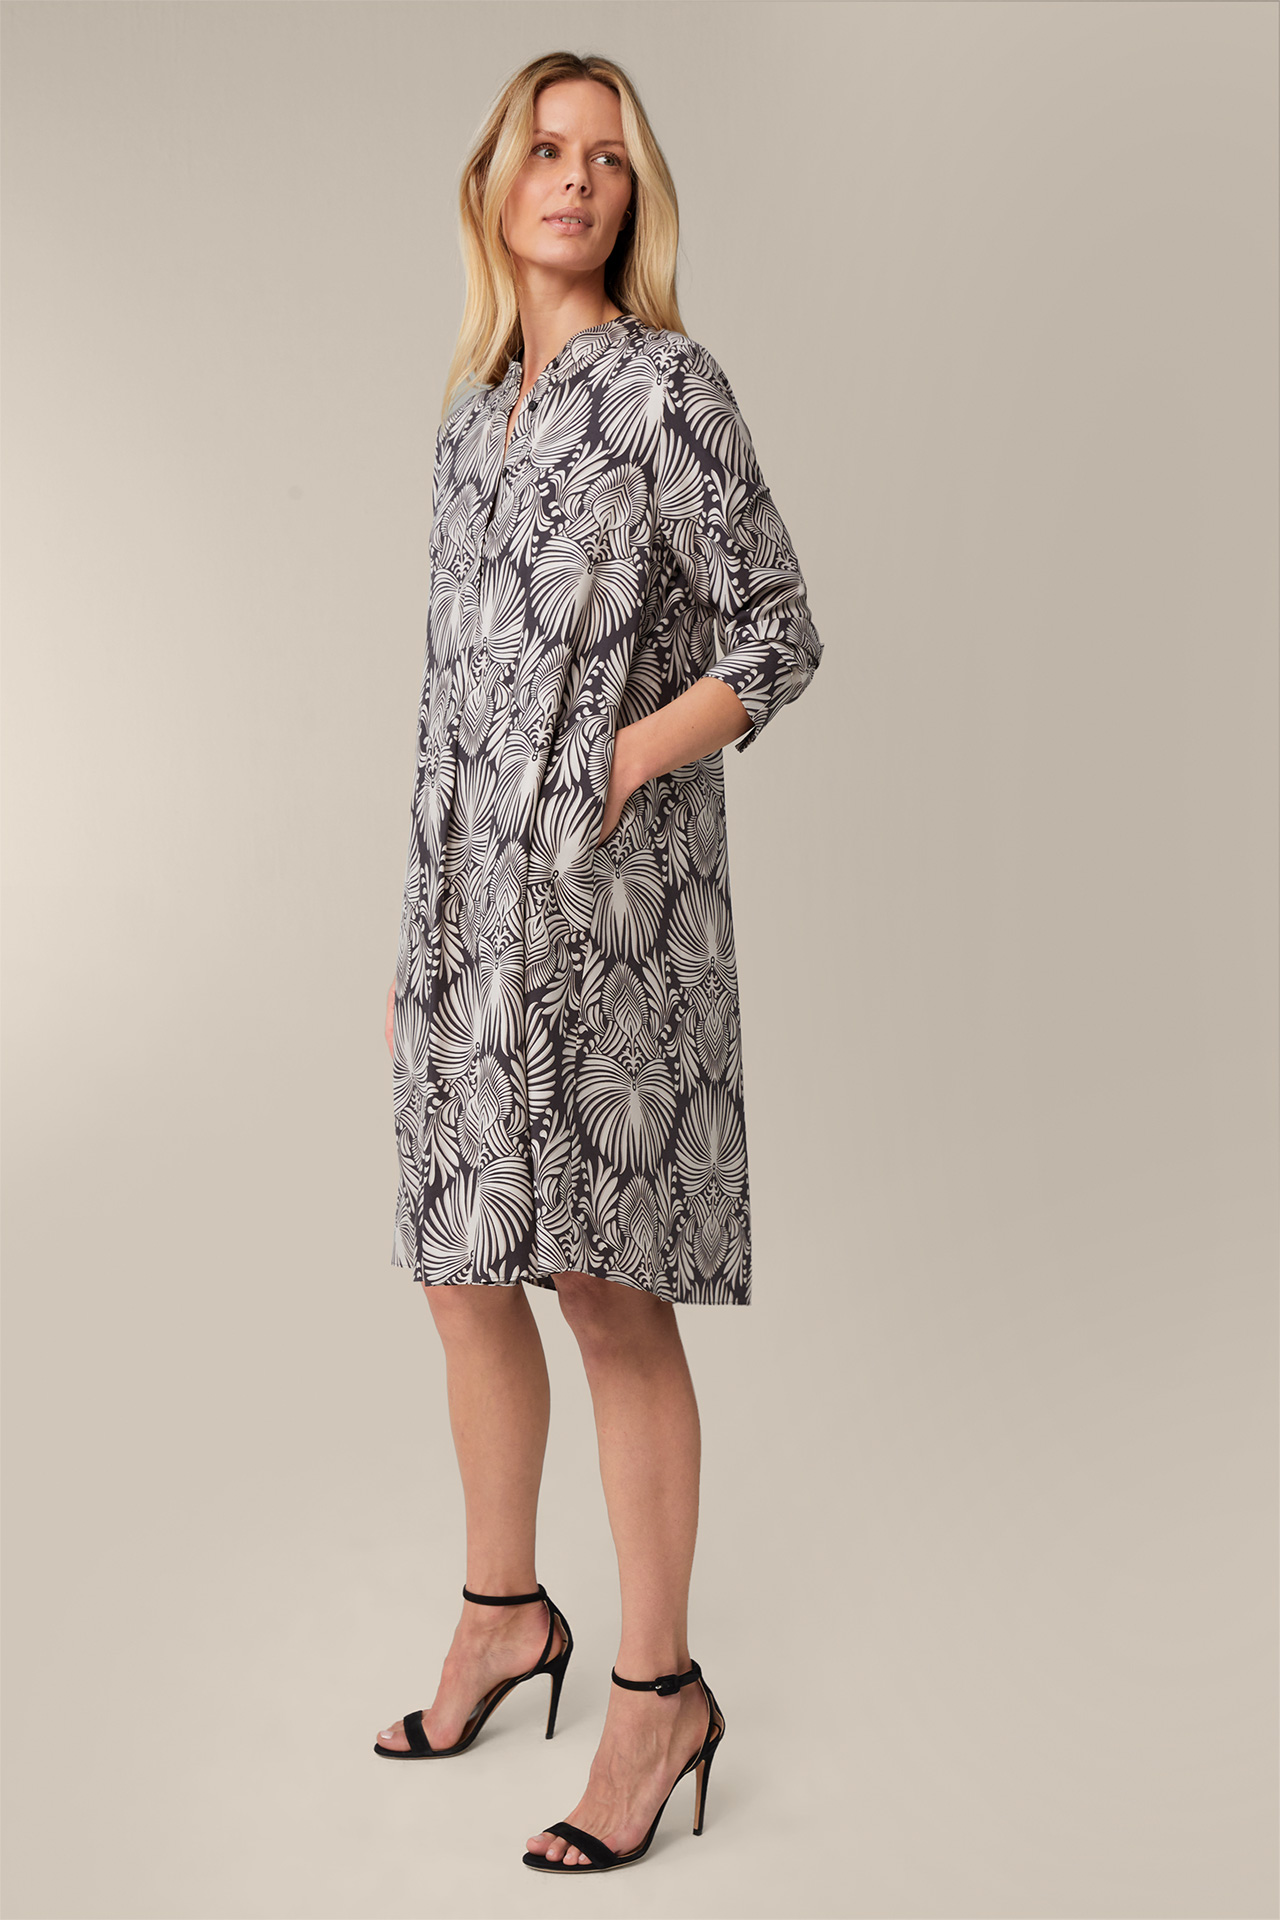 Print dress with stand-up collar in viscose and silk in an anthracite and ecru pattern